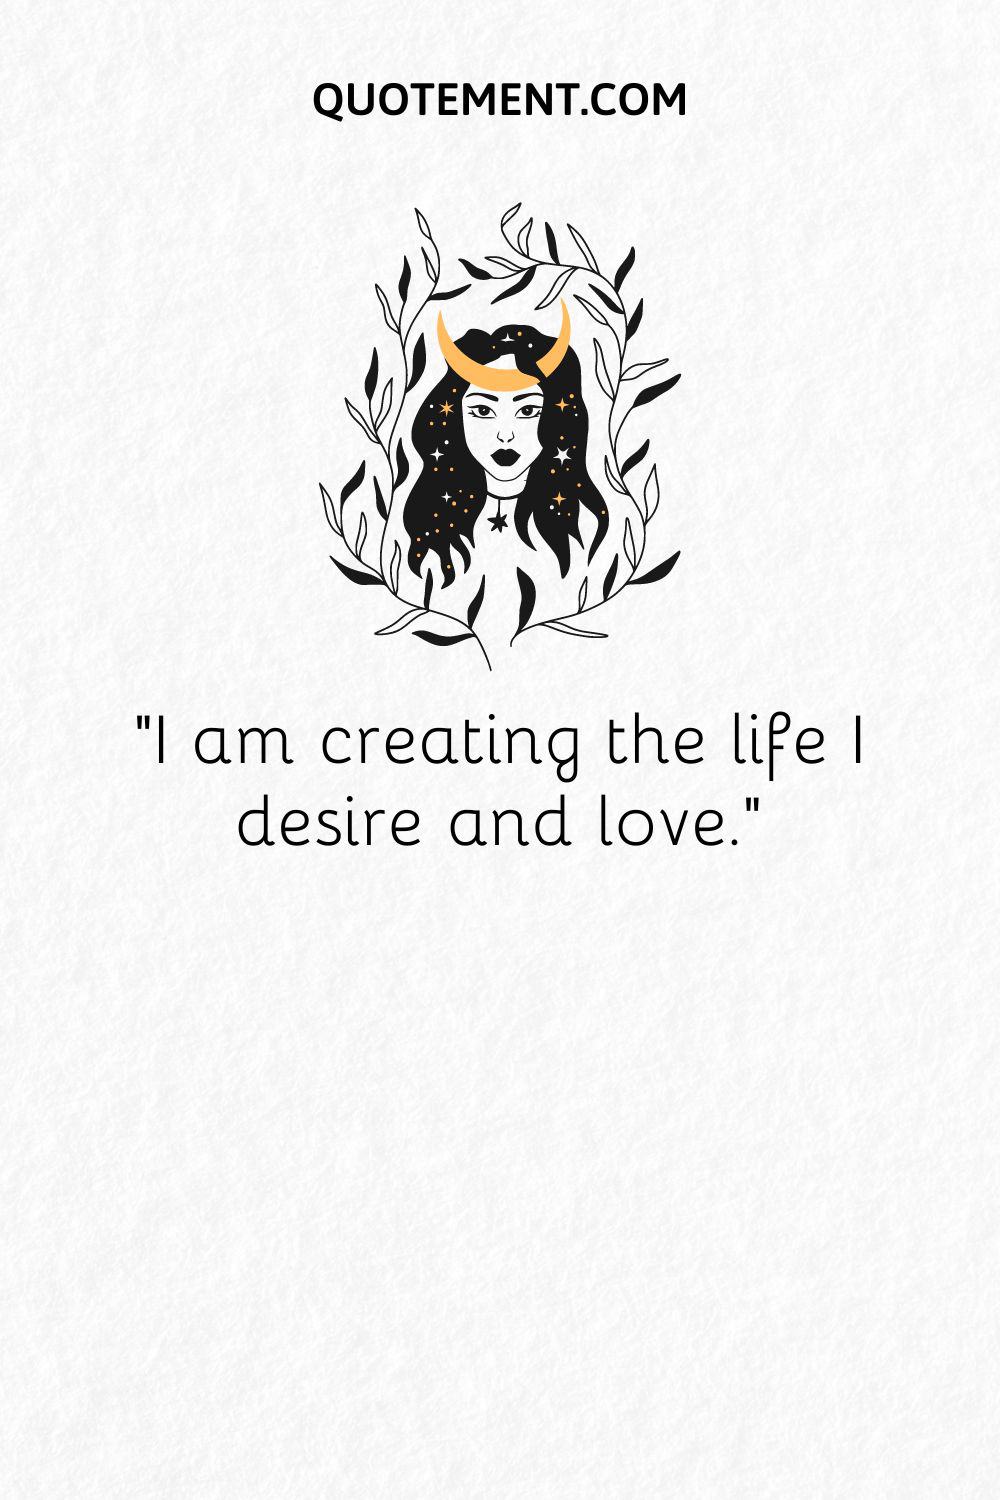 I am creating the life I desire and love